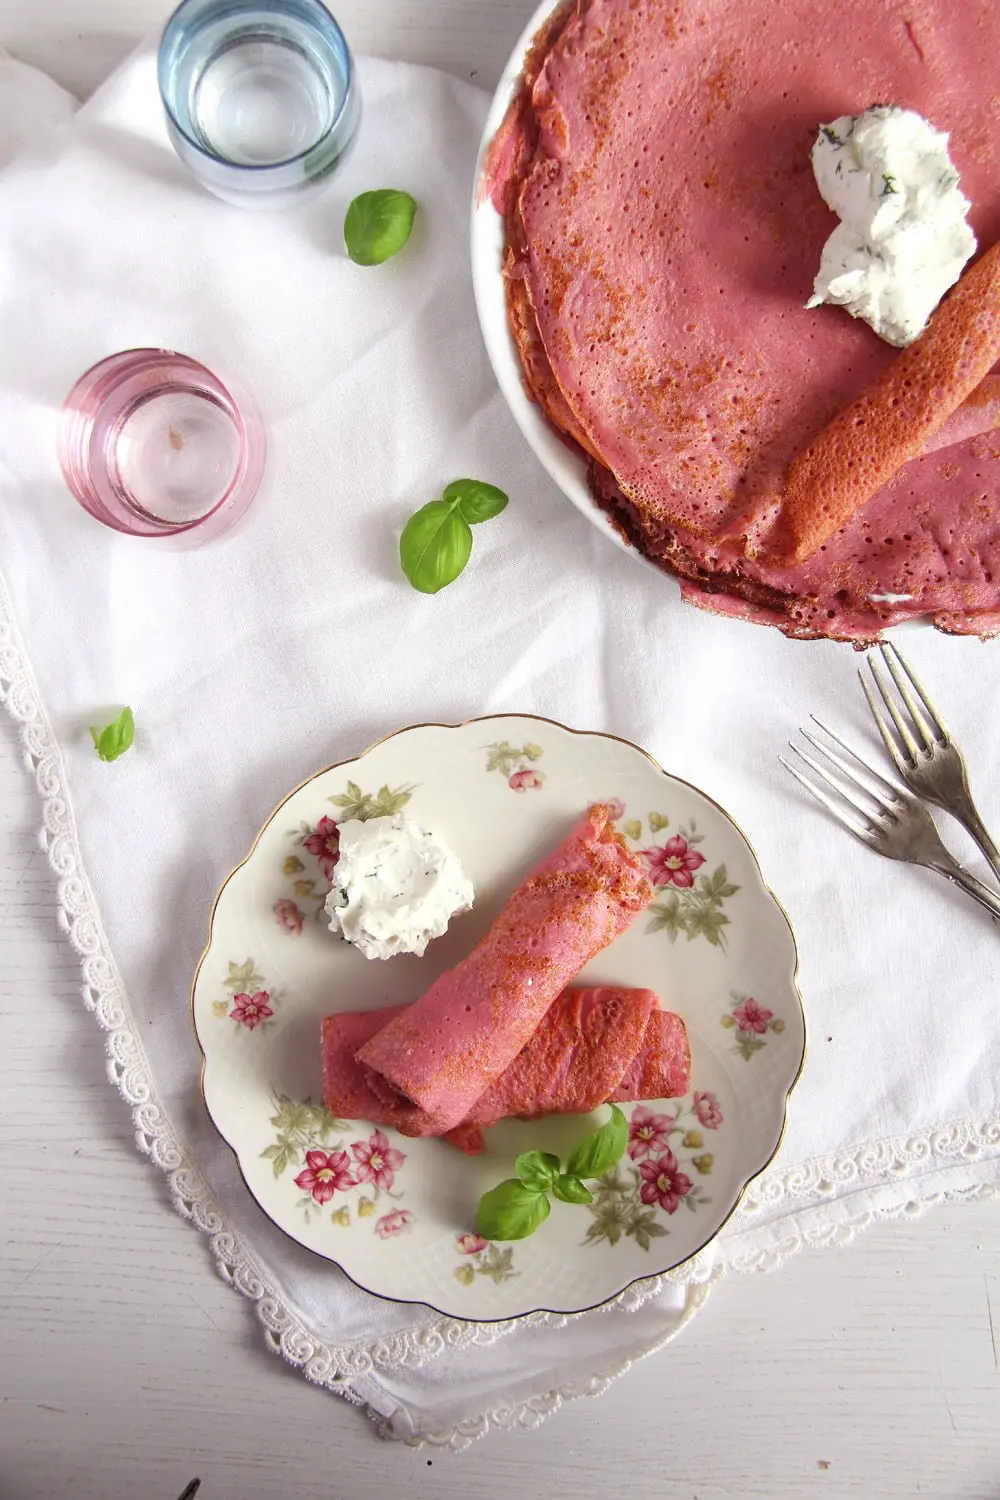 Pink beetroot crepes with savory dill filling.